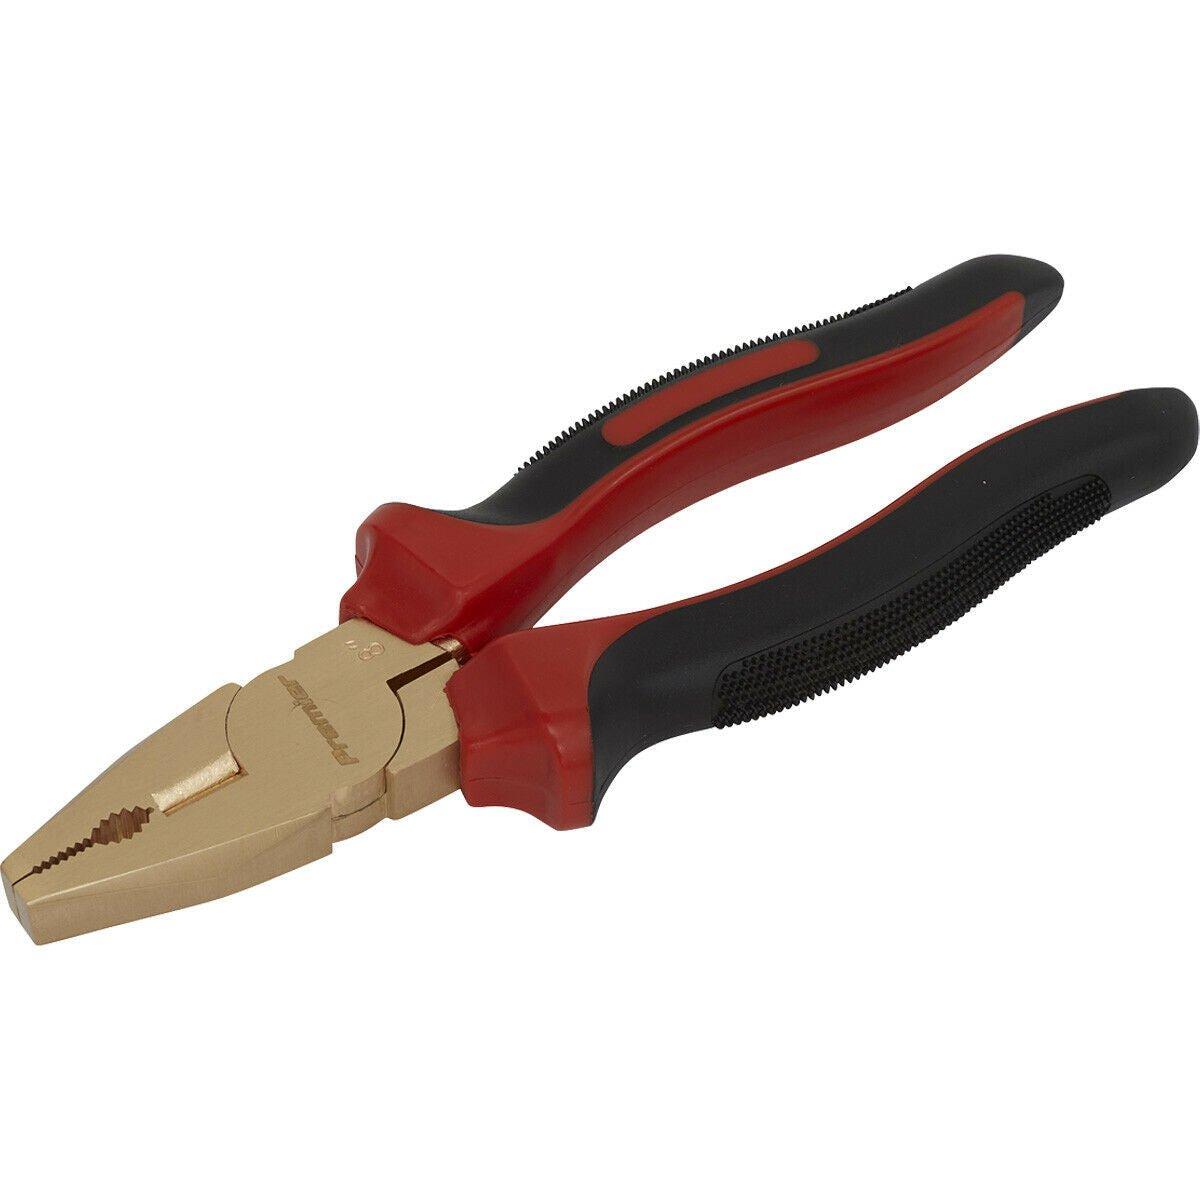 200mm Non-Sparking Combination Pliers - Gripping & Cutting Pliers - Die Forged